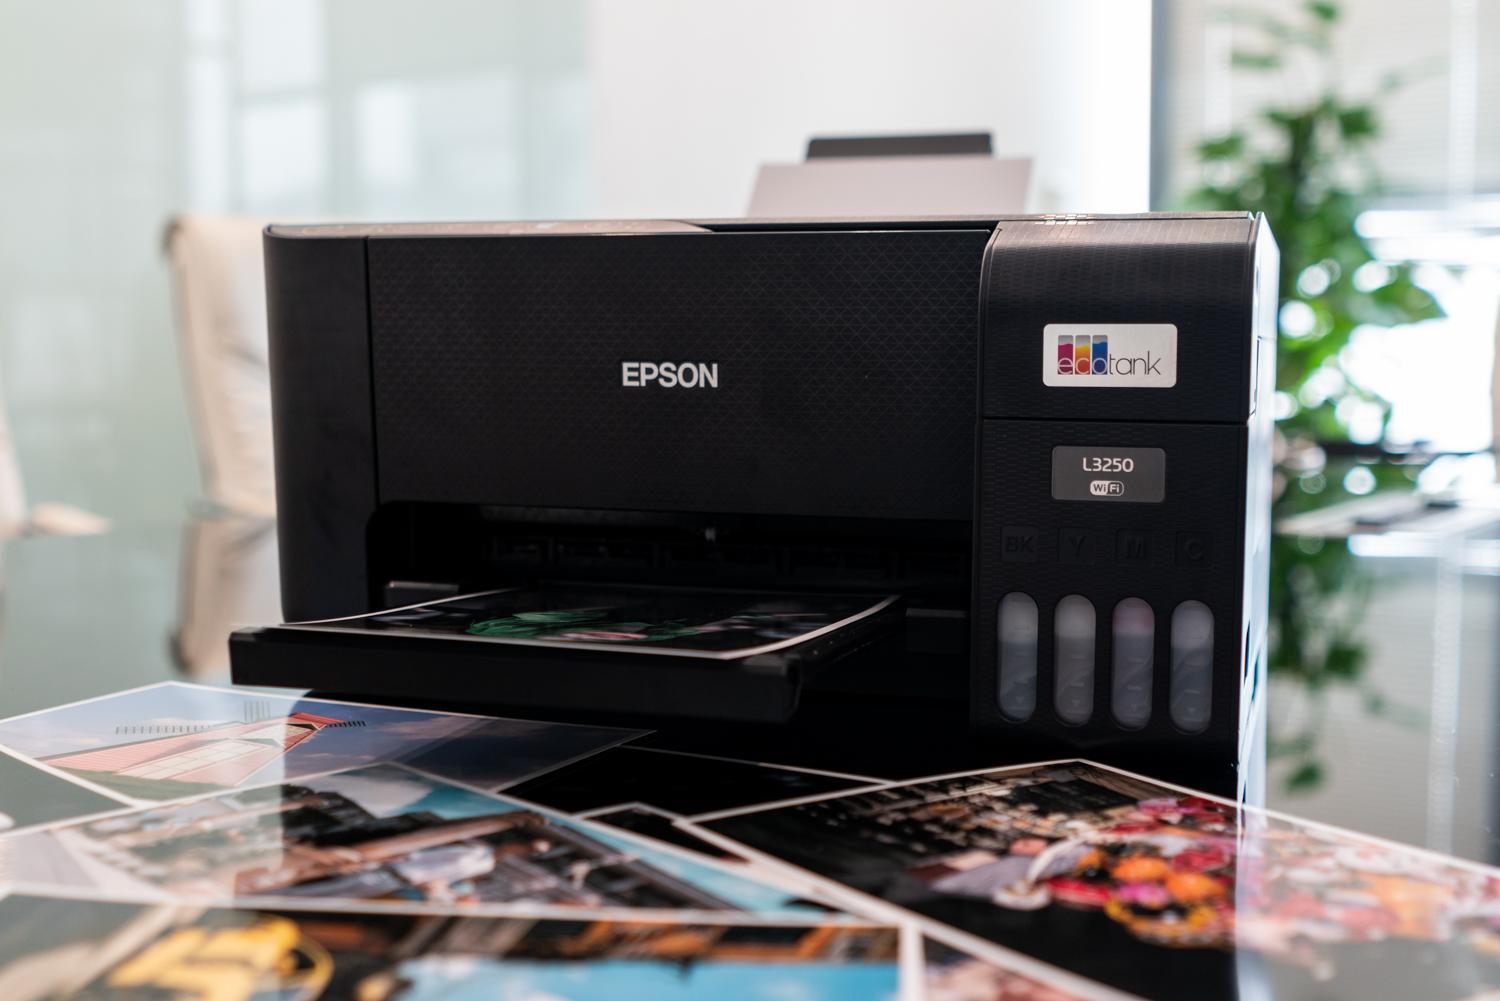 Get inspired to work and study with Epson EcoTank L3250 printer - Photo 1.